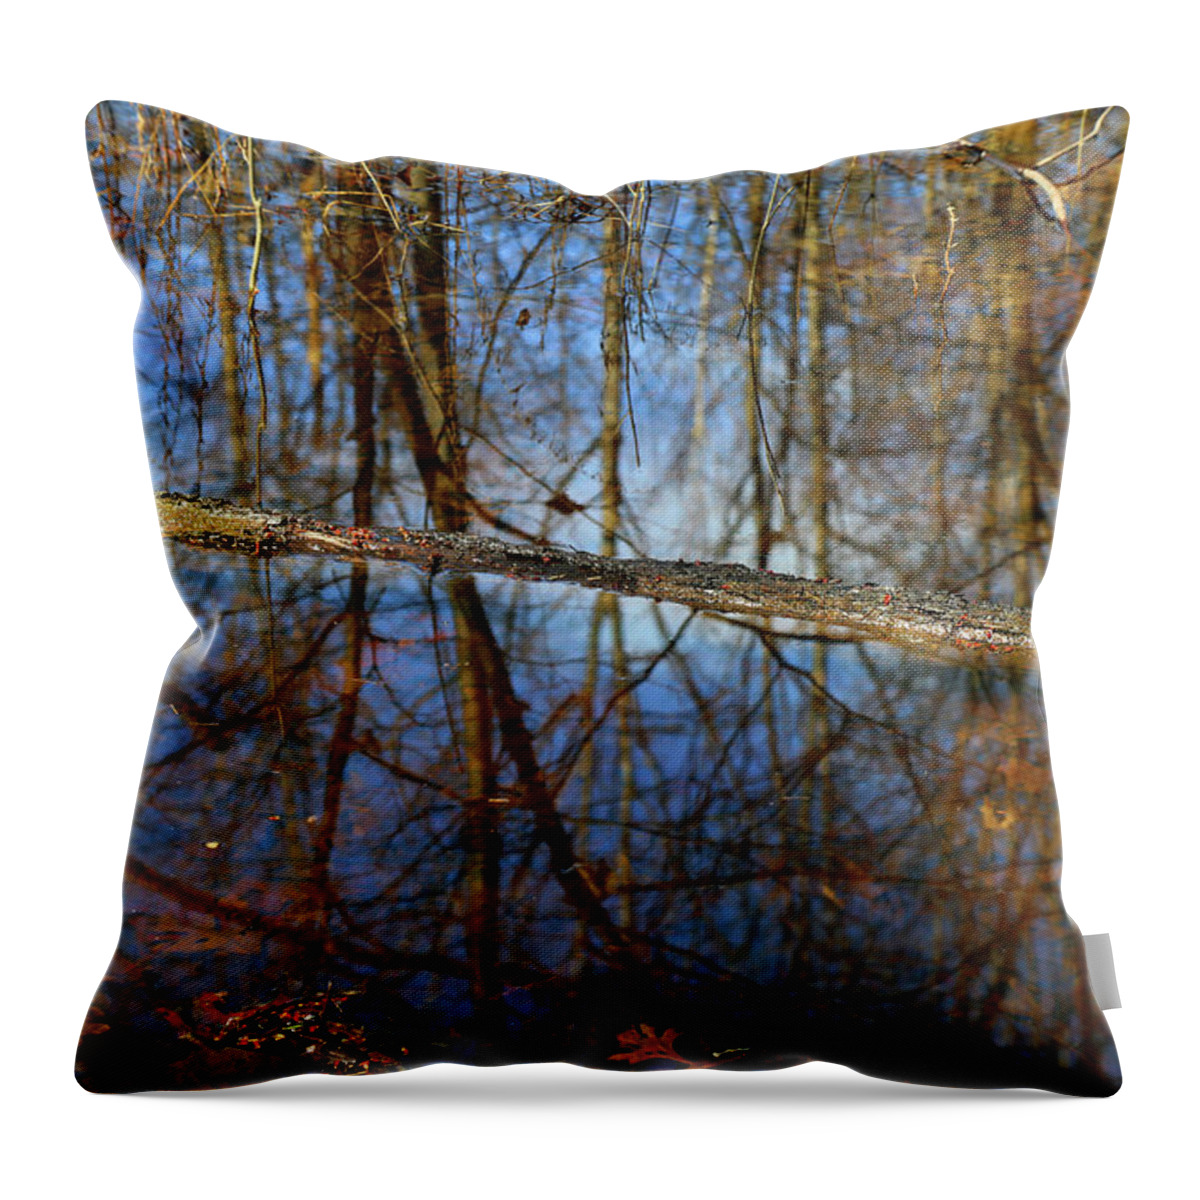 Wetland Throw Pillow featuring the photograph In the Wetland 3 by Mary Bedy